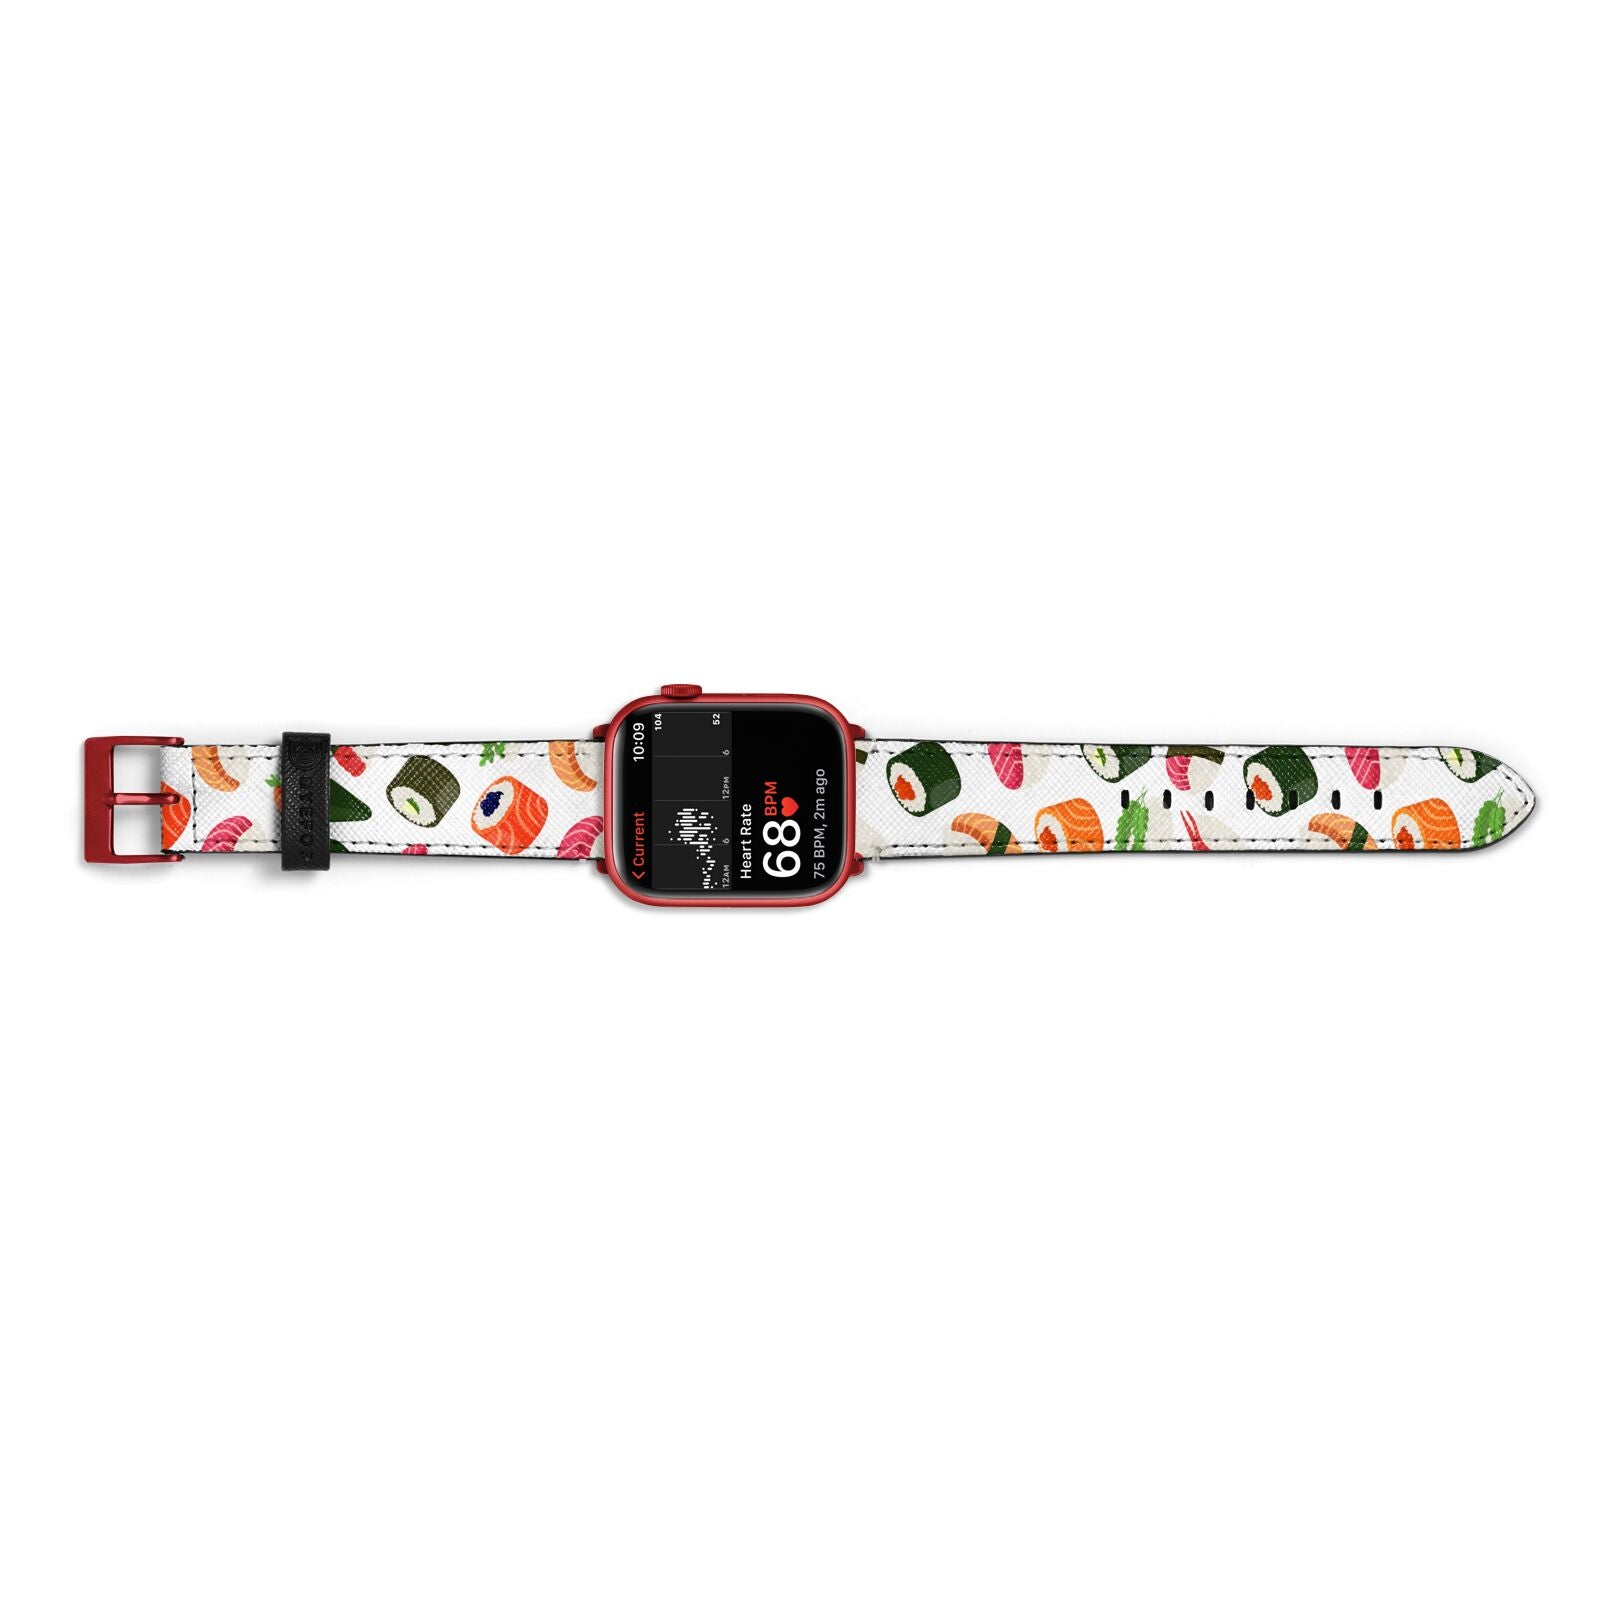 Sushi Fun Apple Watch Strap Size 38mm Landscape Image Red Hardware